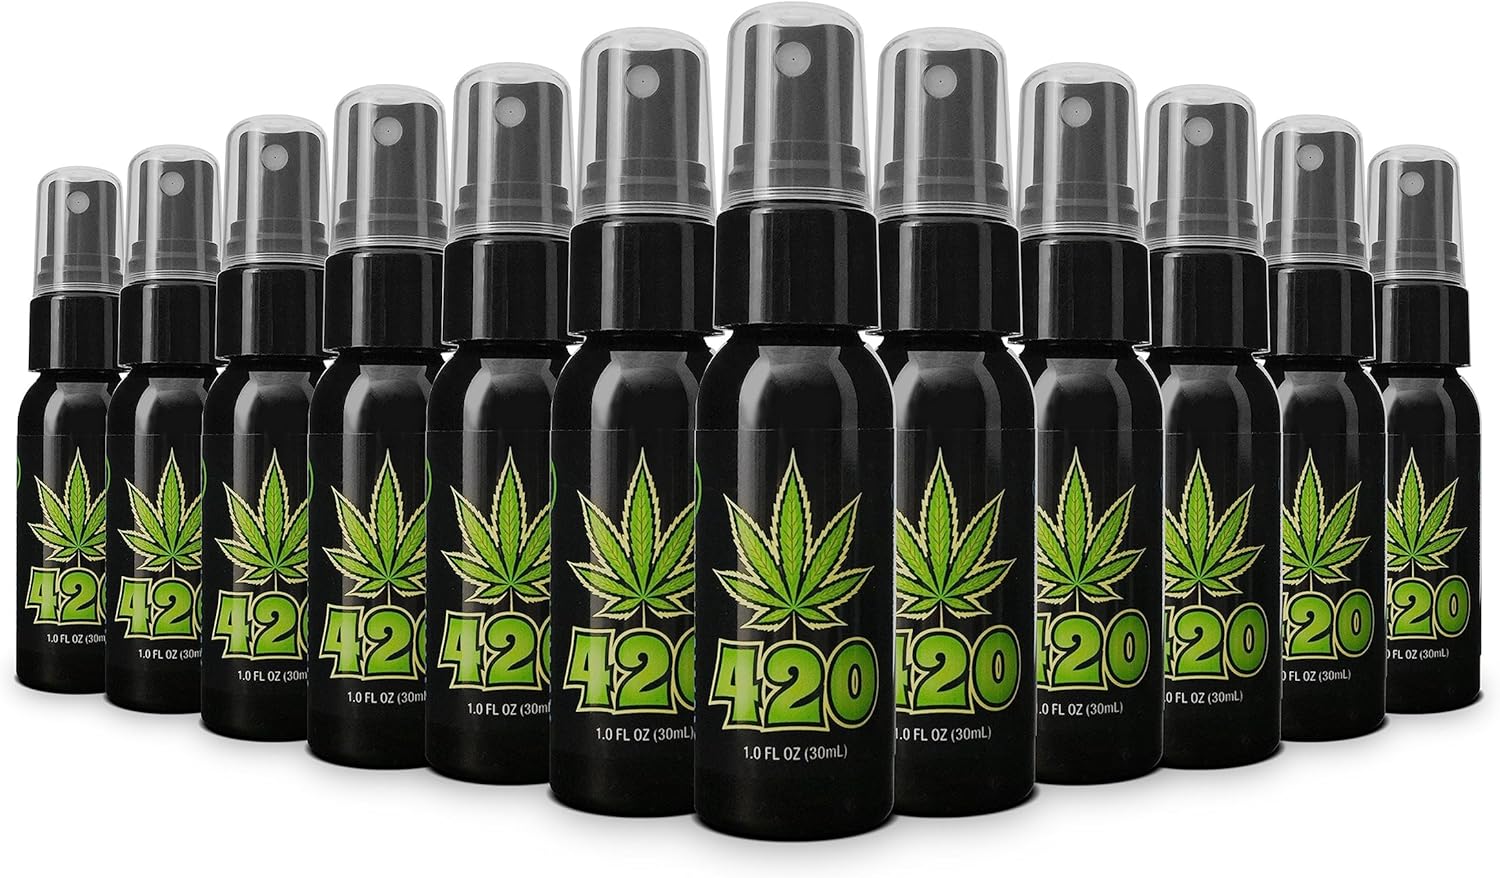 FunkAway 420 Pump Spray, 1 oz., 12 Pack, Eliminate Extreme 420 Odors in the Air, Ideal for Refreshing Cars, Bathrooms, Basements and Dorm Rooms; Travel Size for On The Go